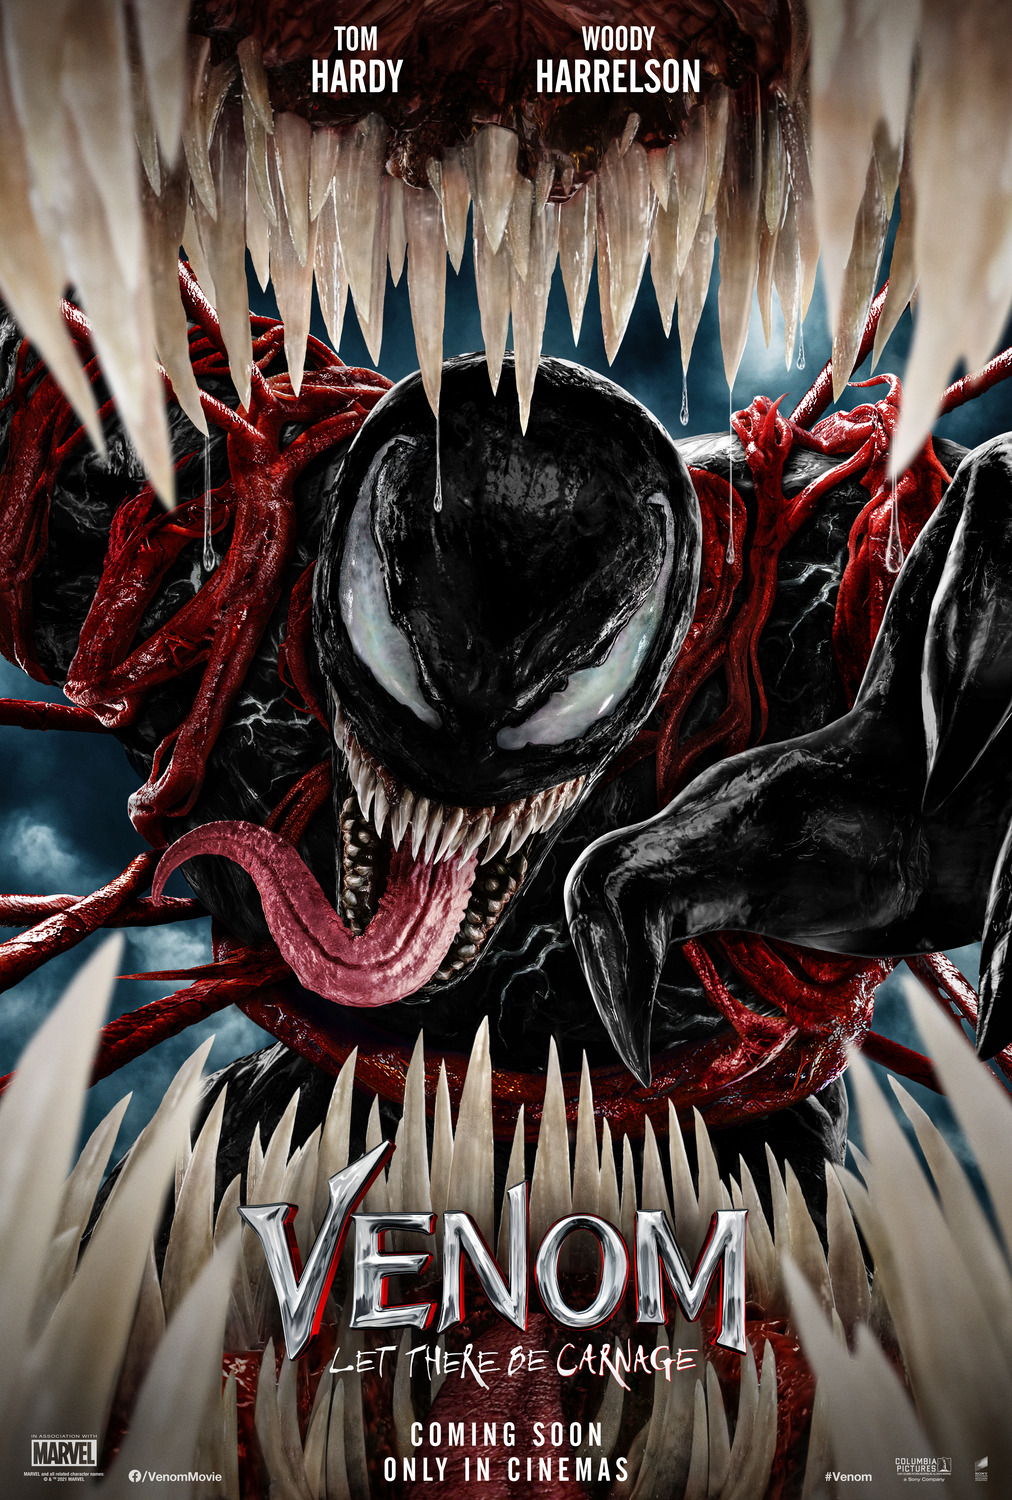 Venom- Let There Be Carnage